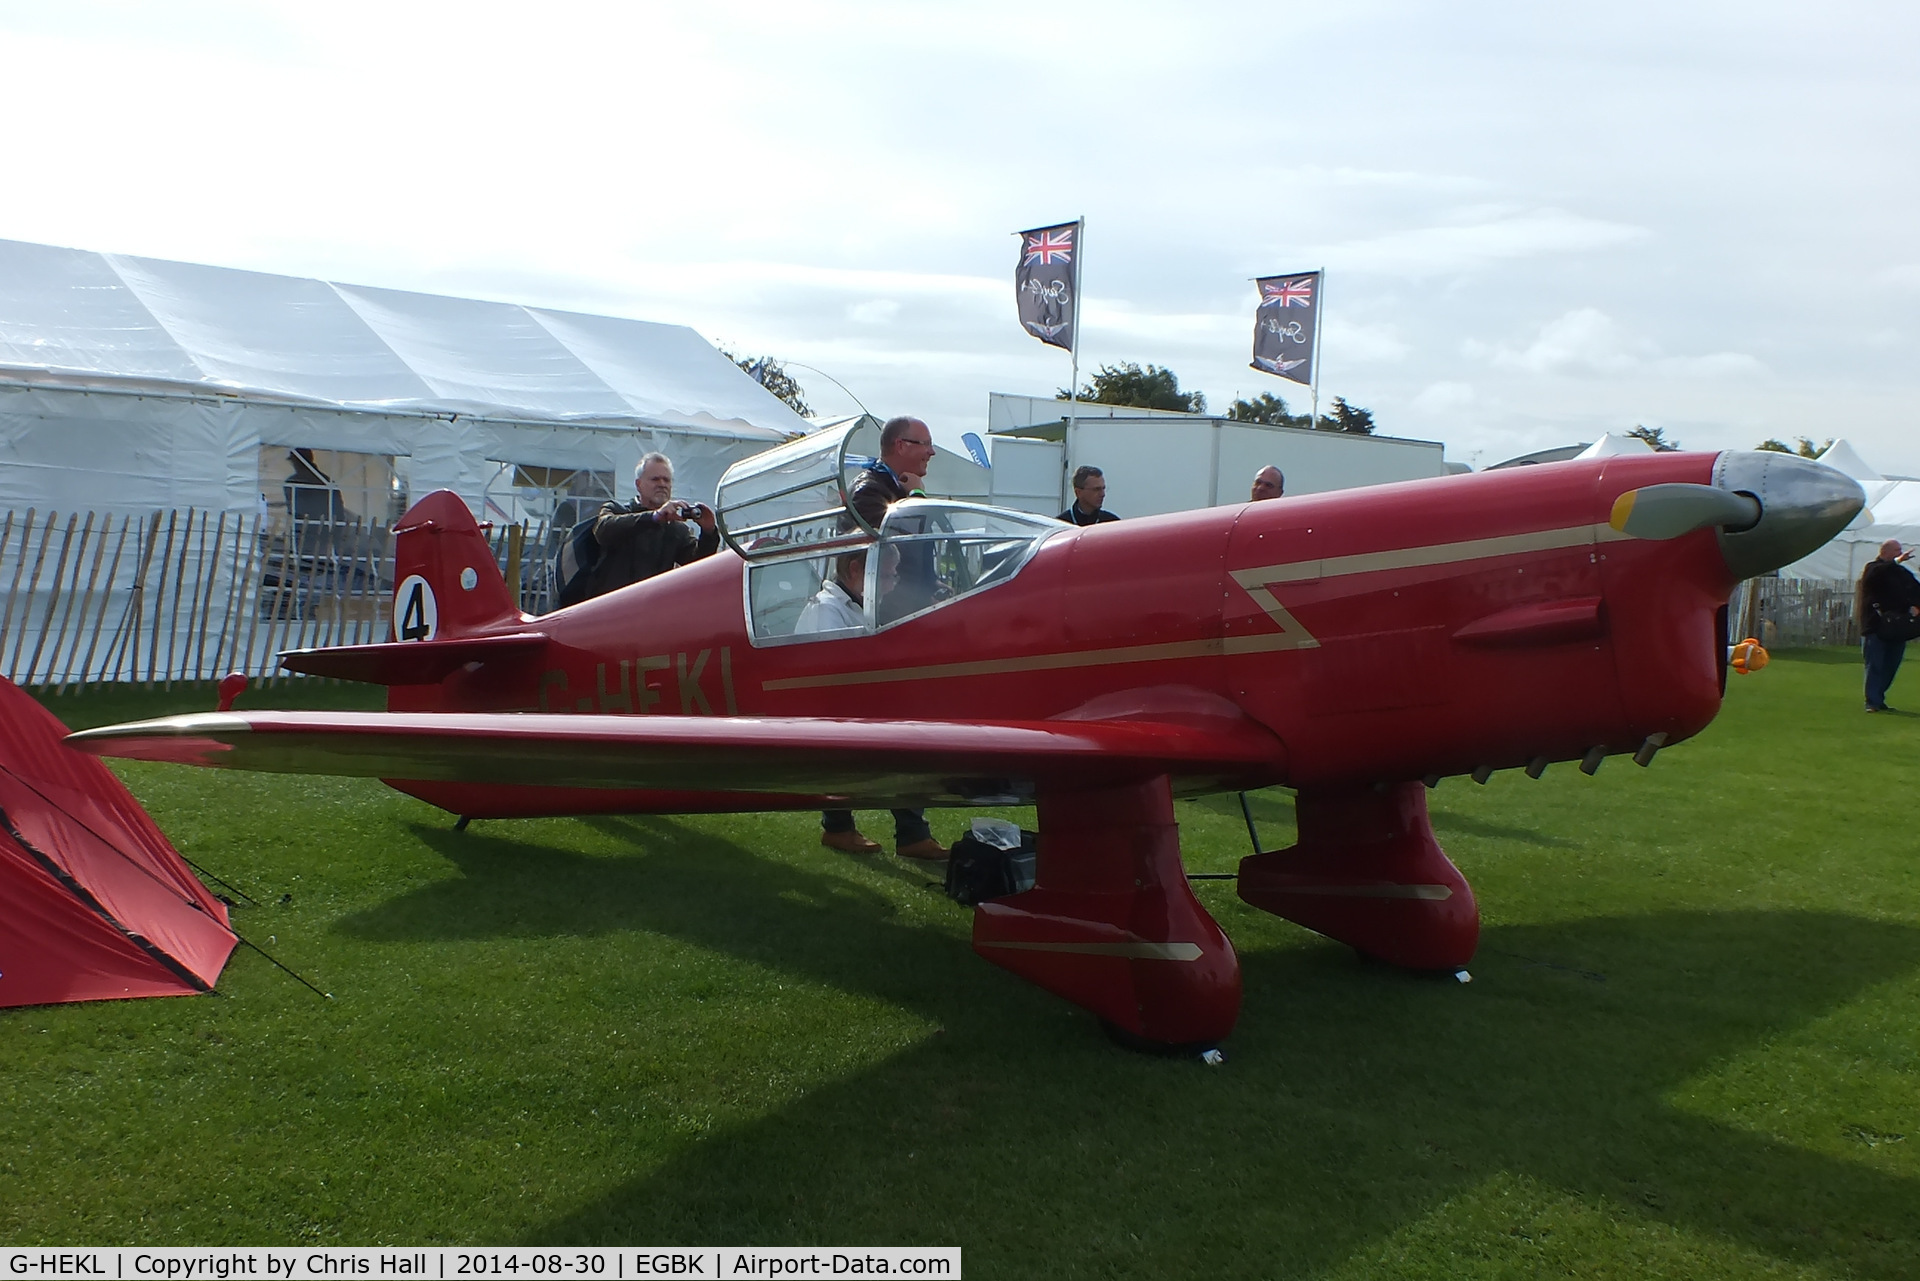 G-HEKL, 2008 Percival Mew Gull replica C/N PFA 013-14759, at the LAA Rally 2014, Sywell